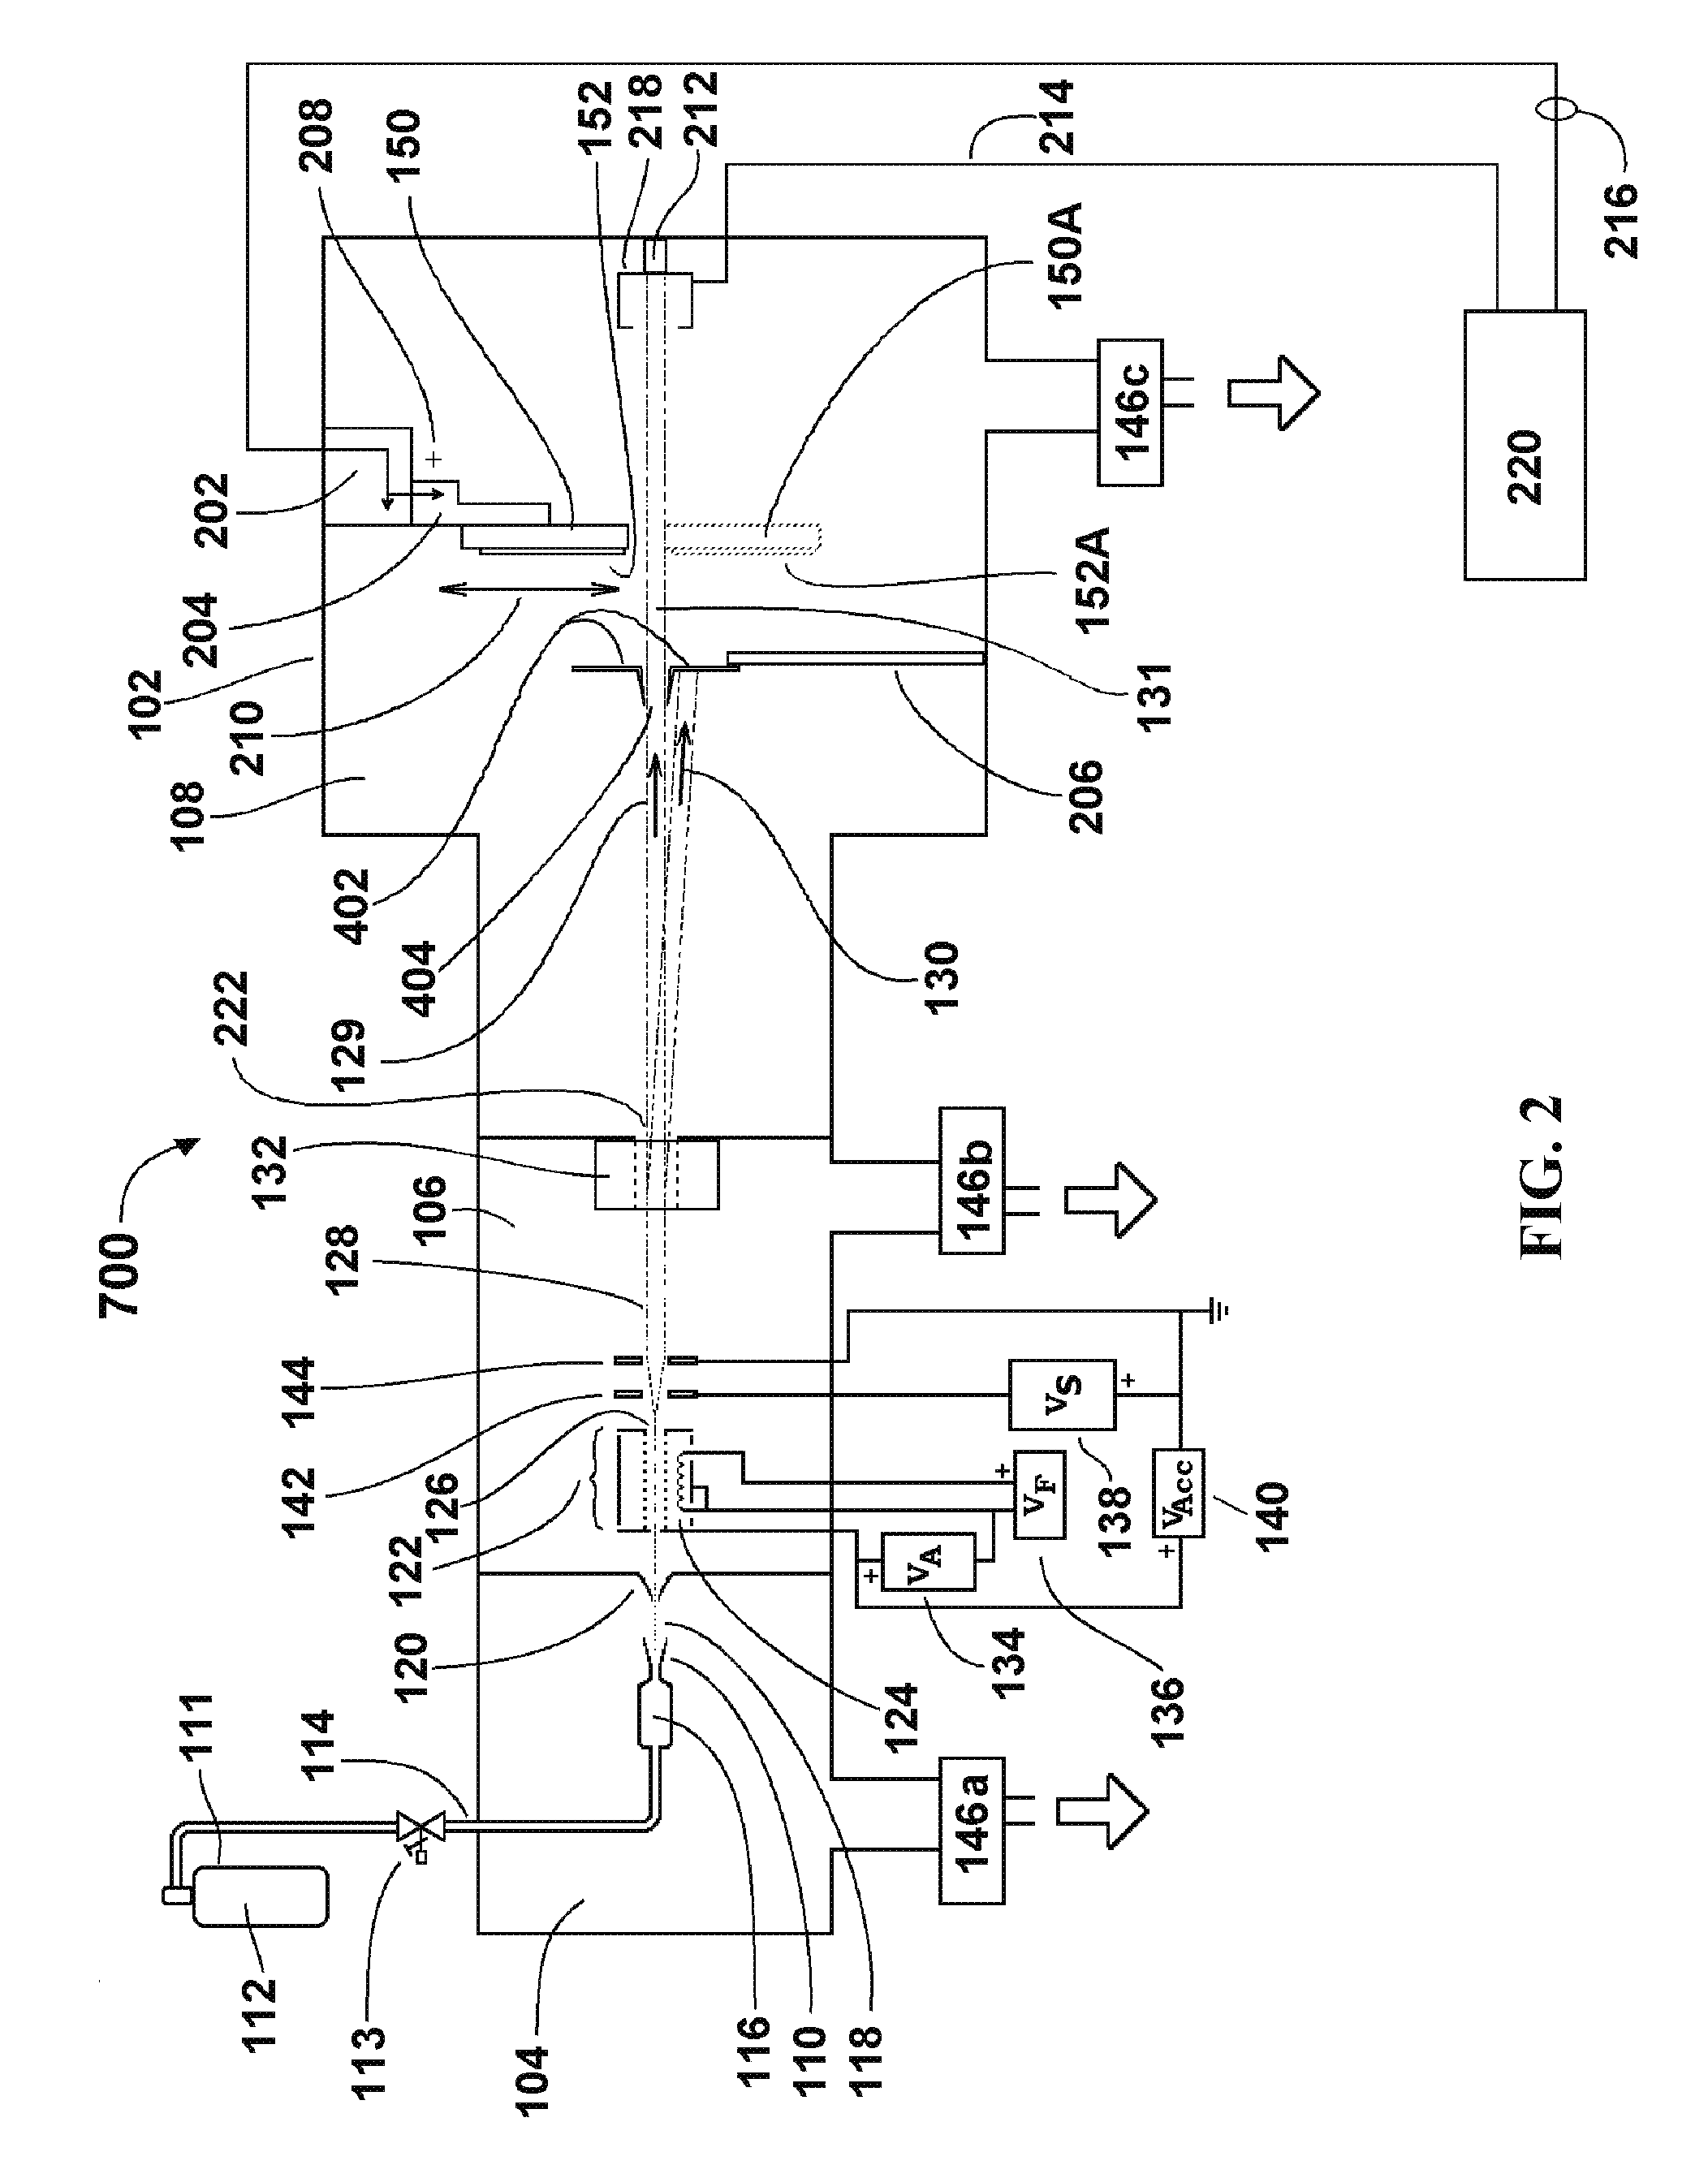 Apparatus and method for reducing particulate contamination in gas cluster ion beam processing equipment